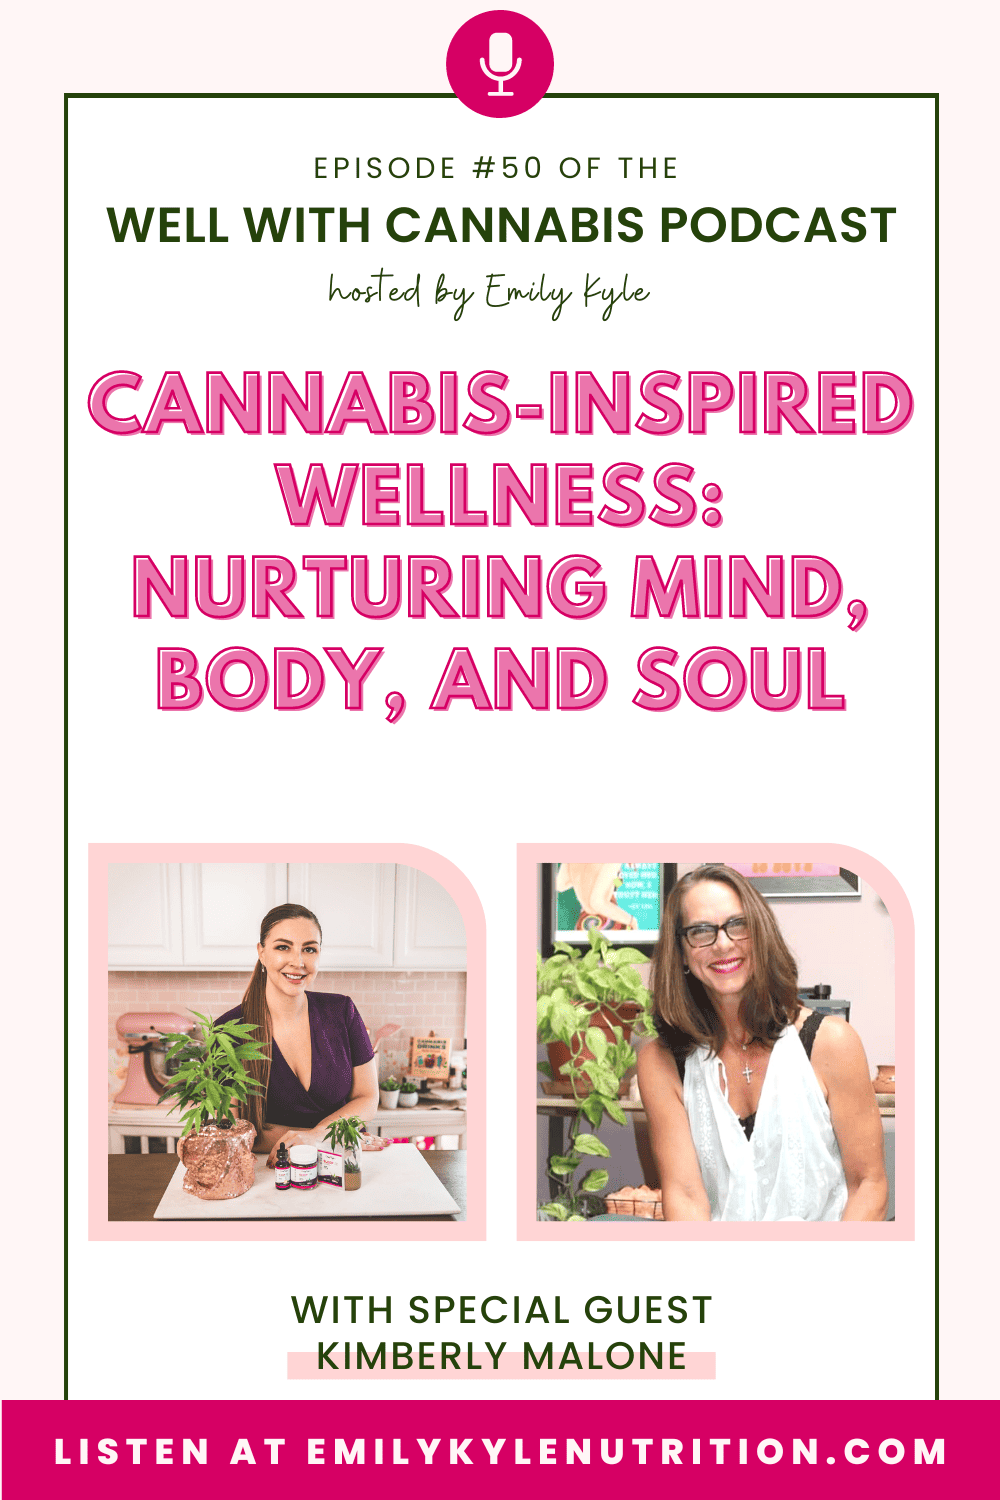 A picture of Kimberly Malone, a guest on the Well With Cannabis podcast.